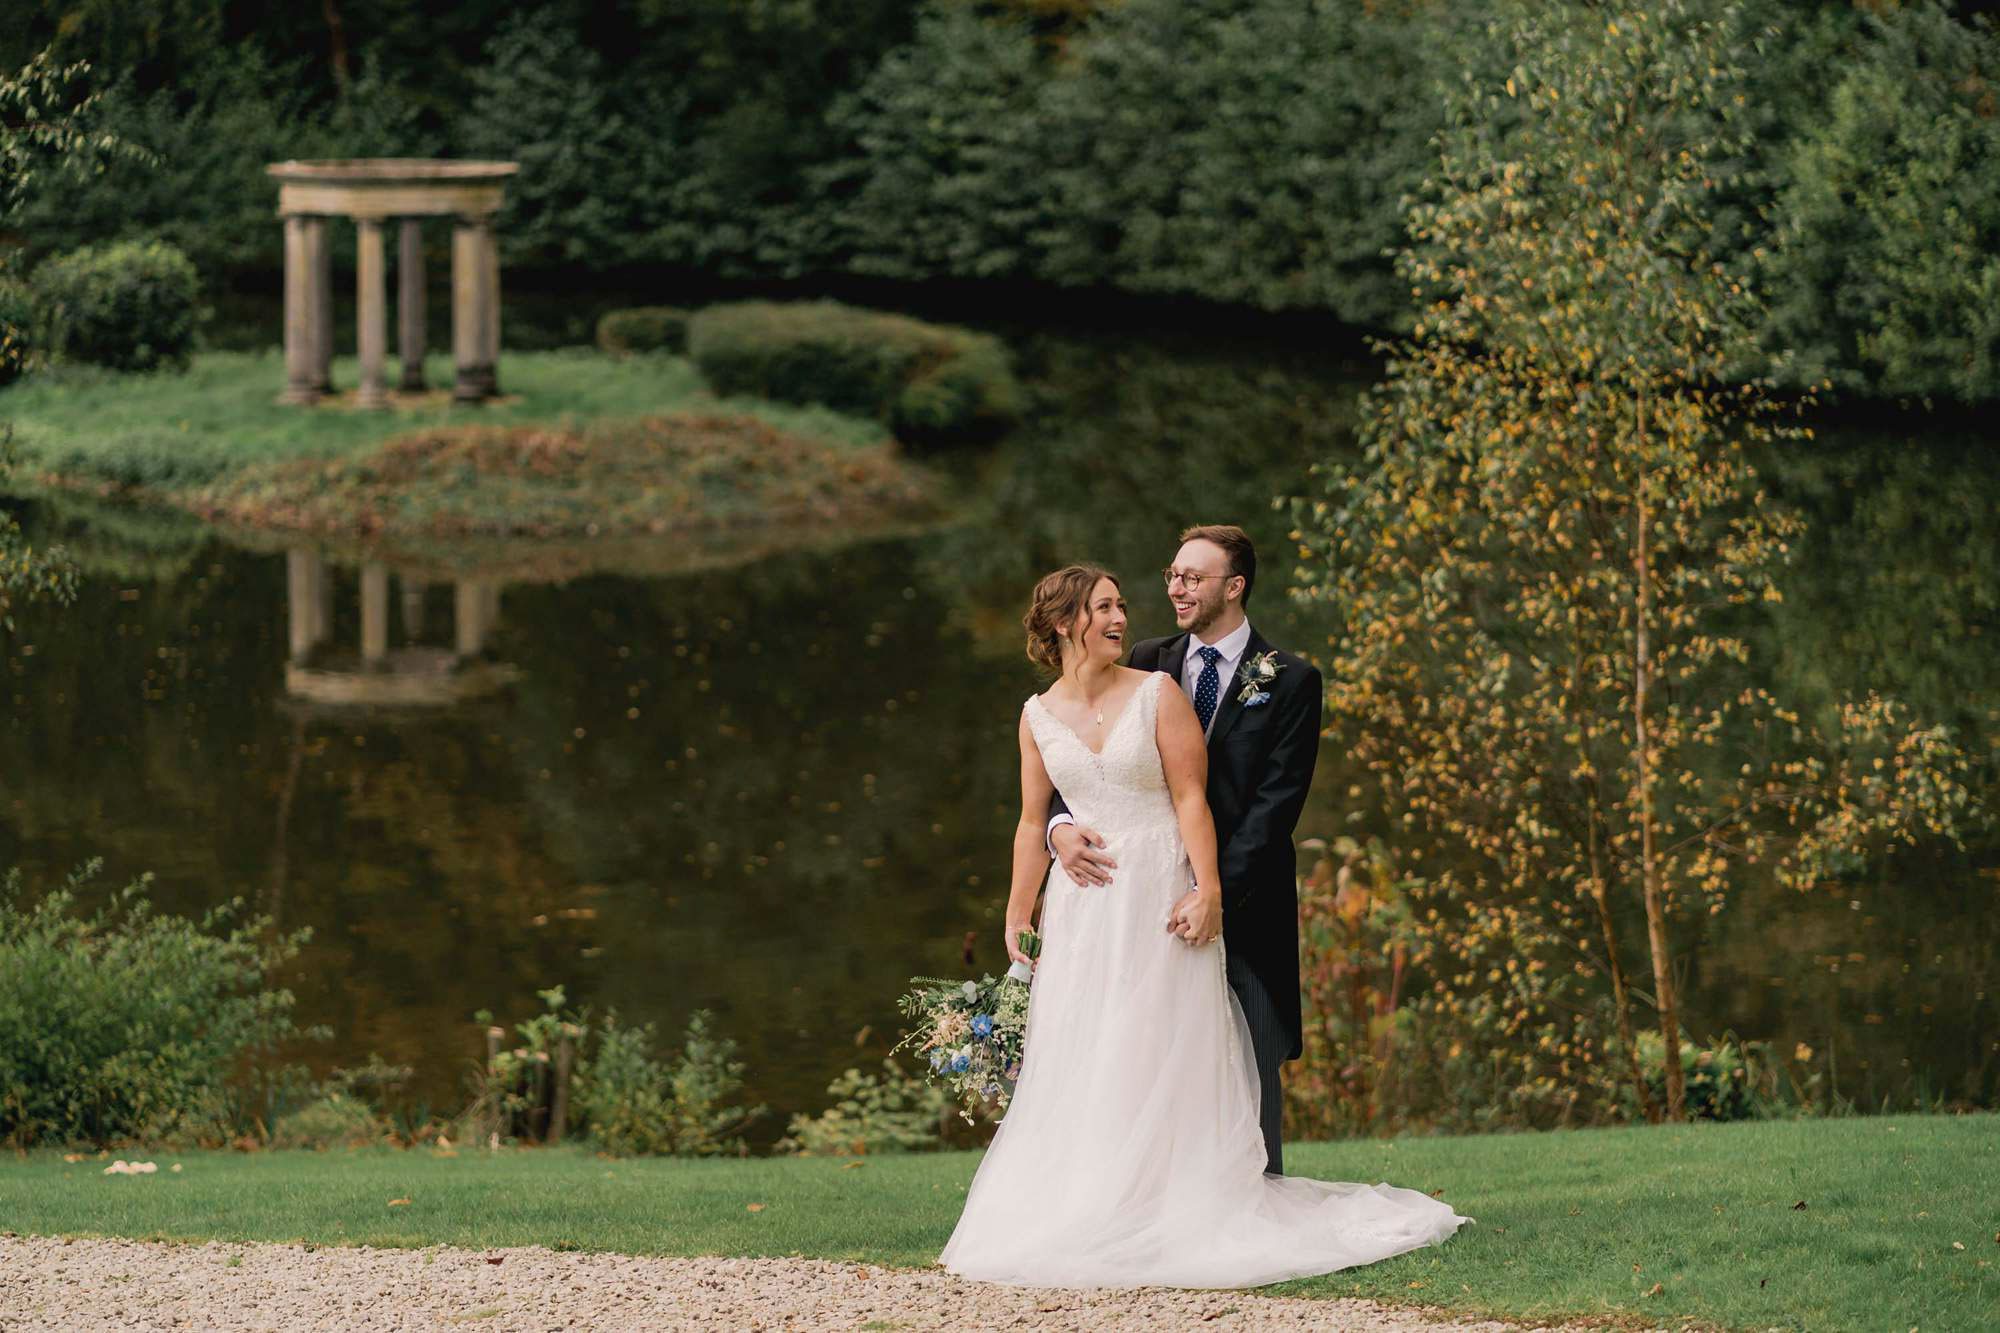 Bride and groom hug closely in front of the lake on their wedding day at Salomons Estate in Tunbridge Wells.